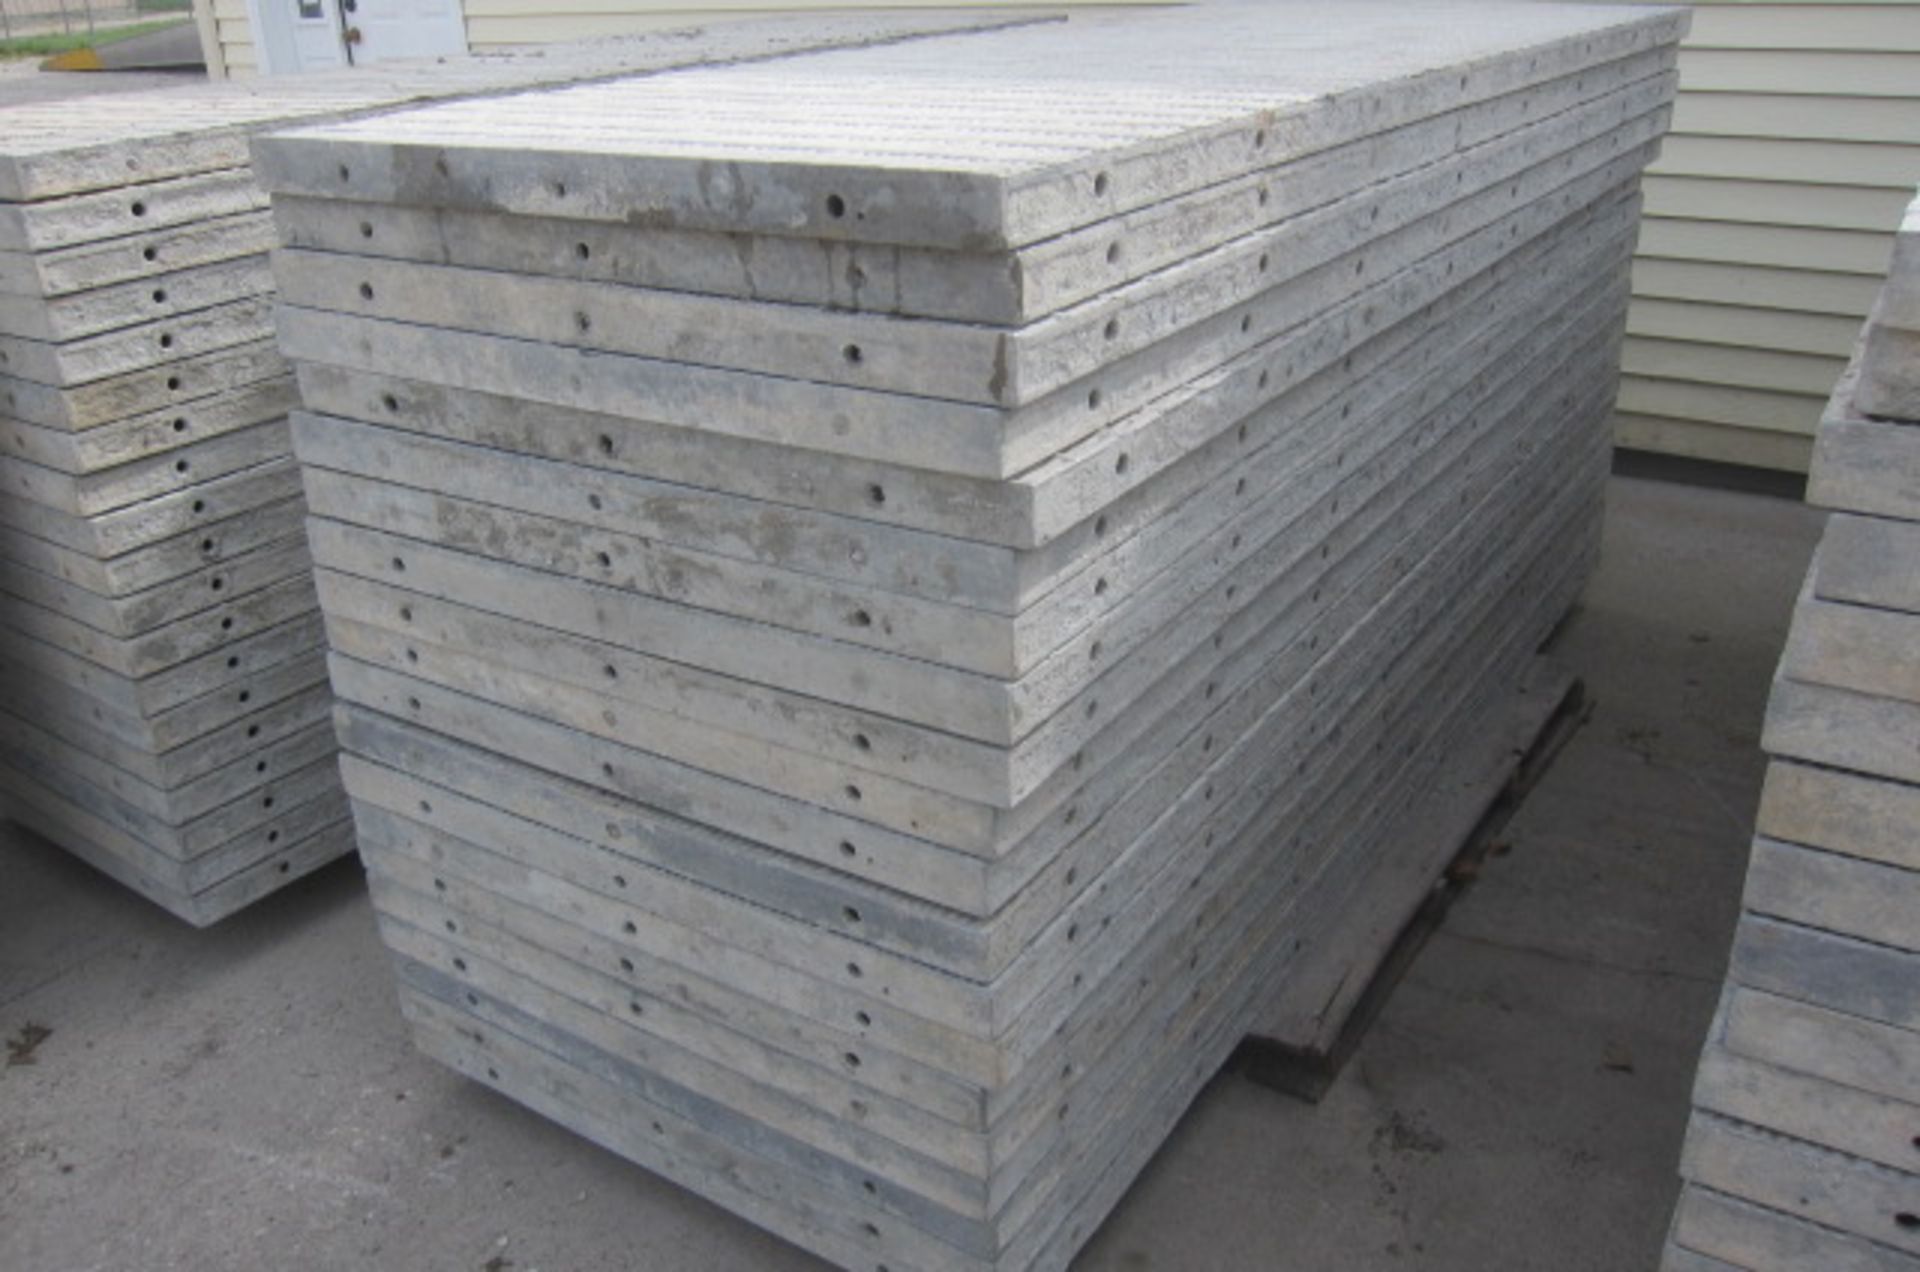 (20) 36" X 8' Wall-ties Aluminum Concrete Forms, VertiBrick, 6-12 Hole Pattern, Nice Clean Set, - Image 4 of 4